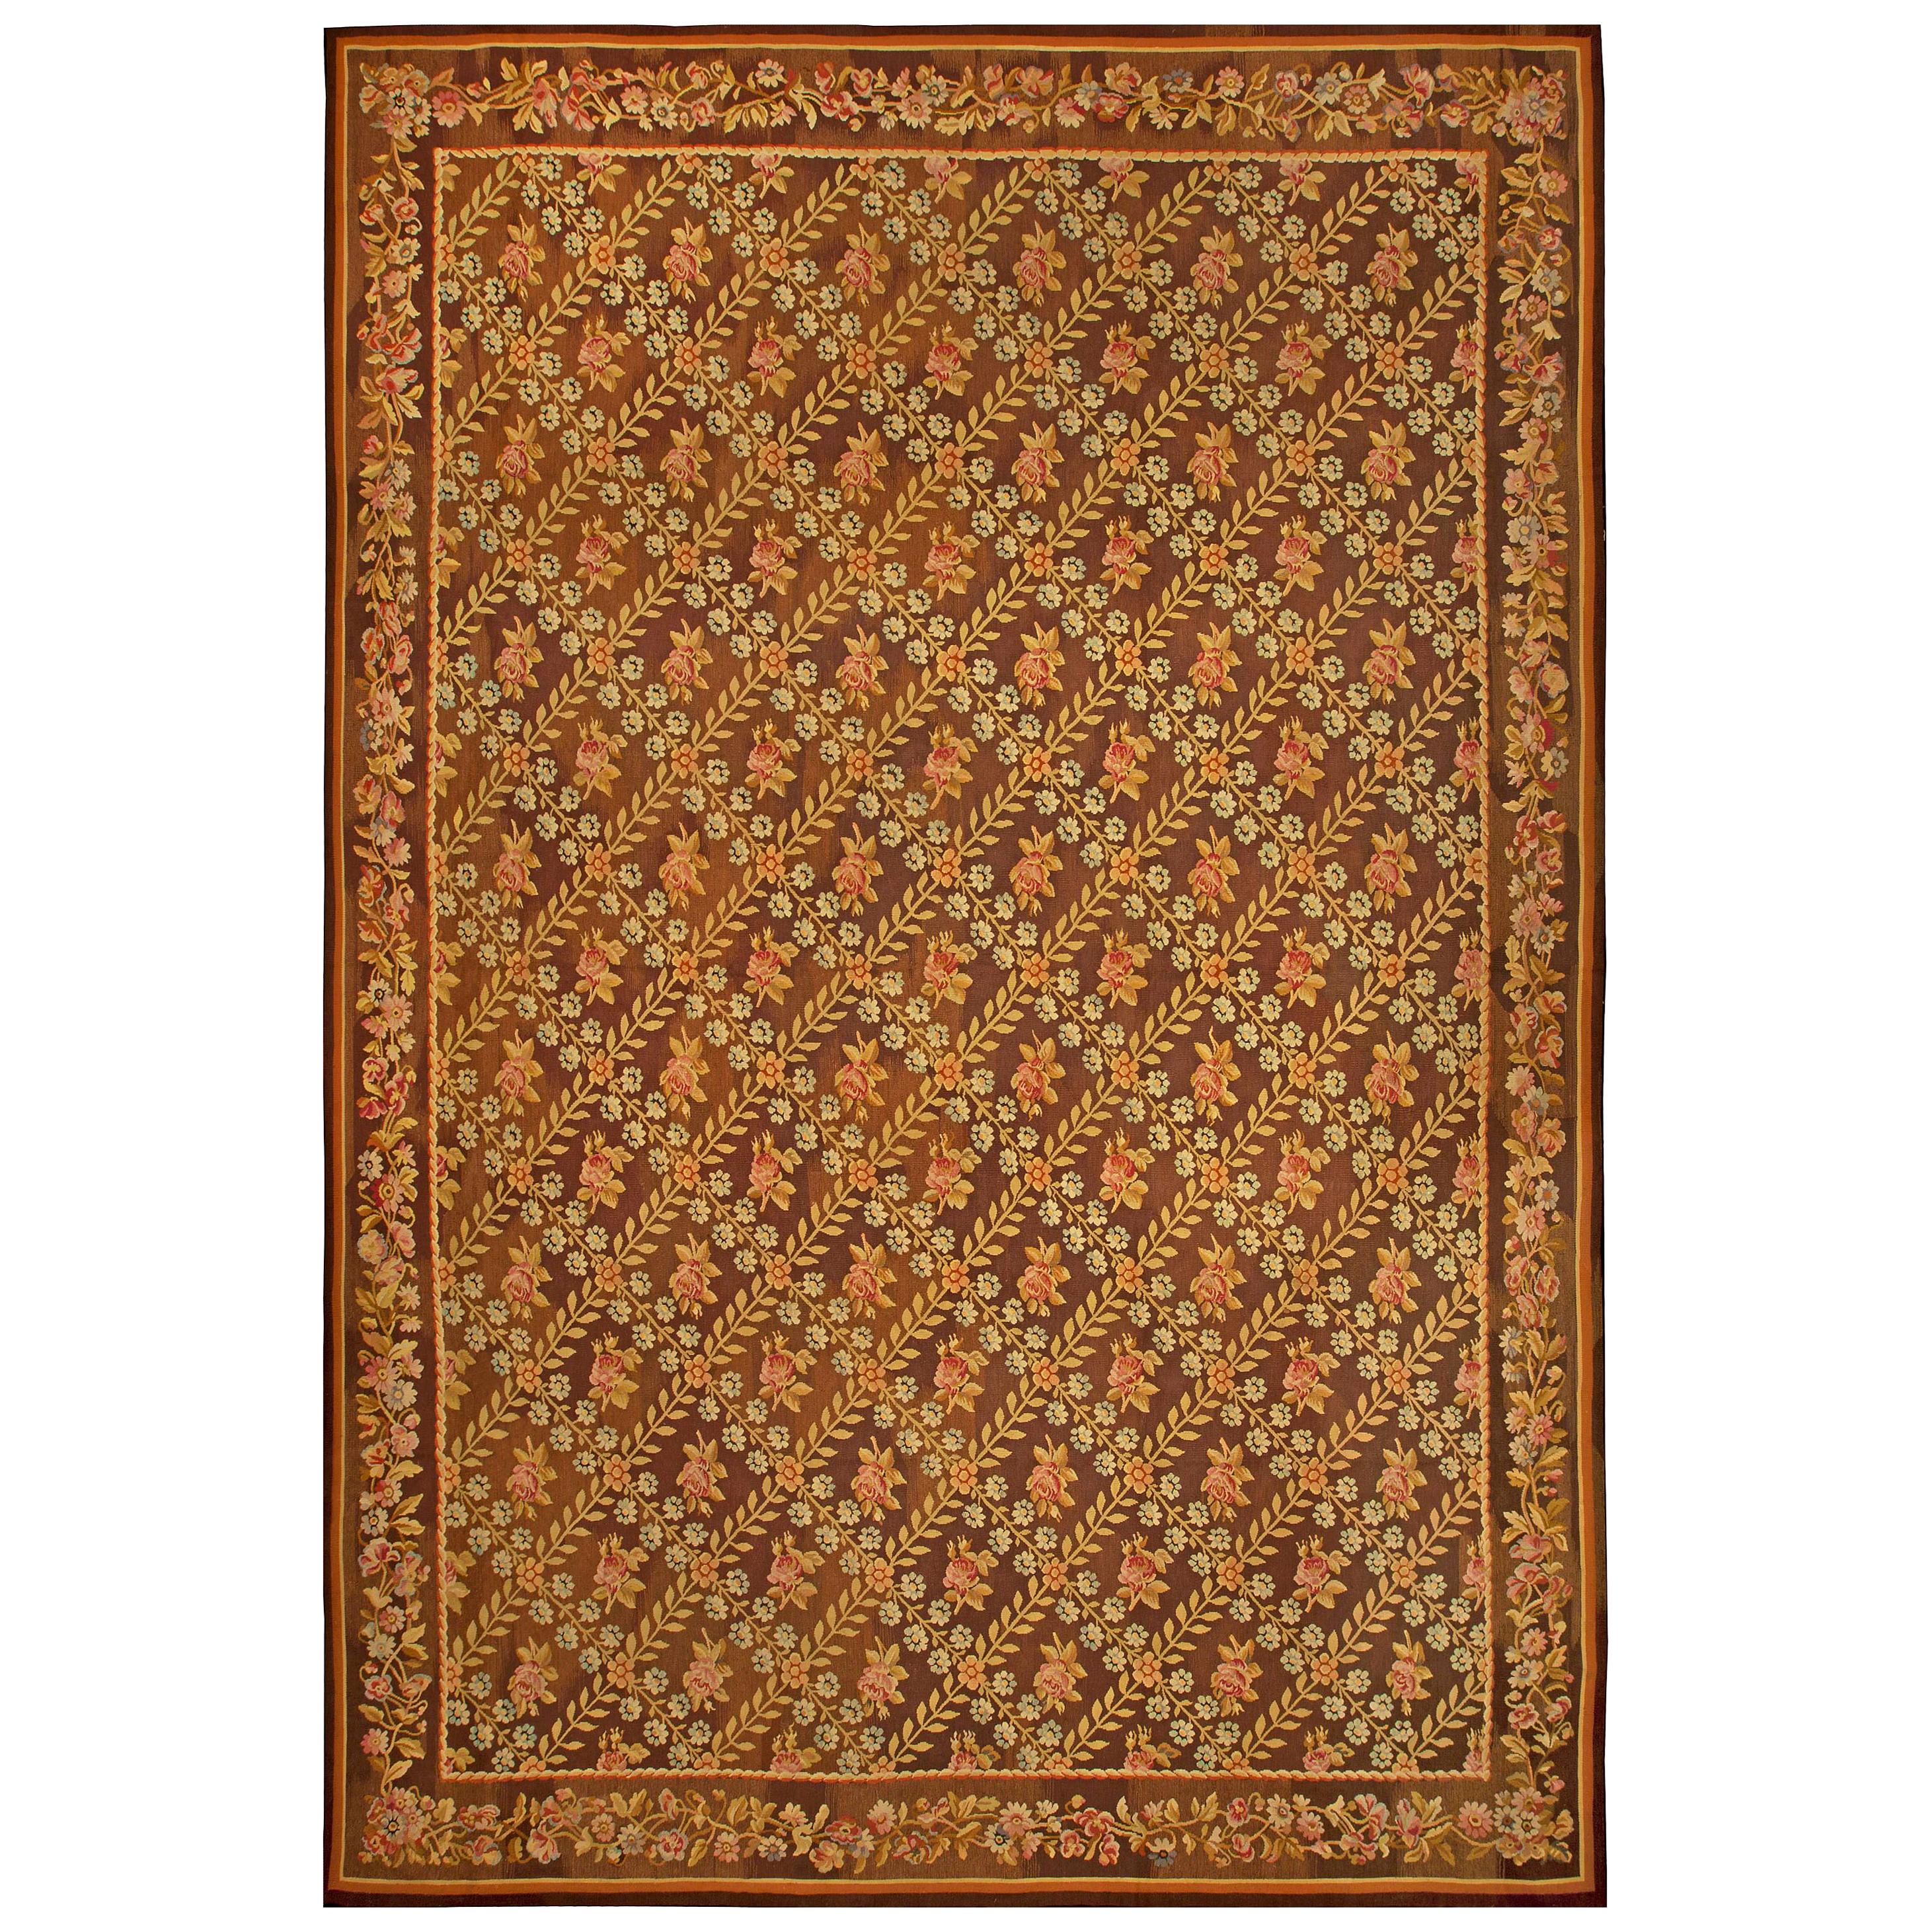 Antique French Aubusson Brown Botanic Handmade Wool Carpet For Sale